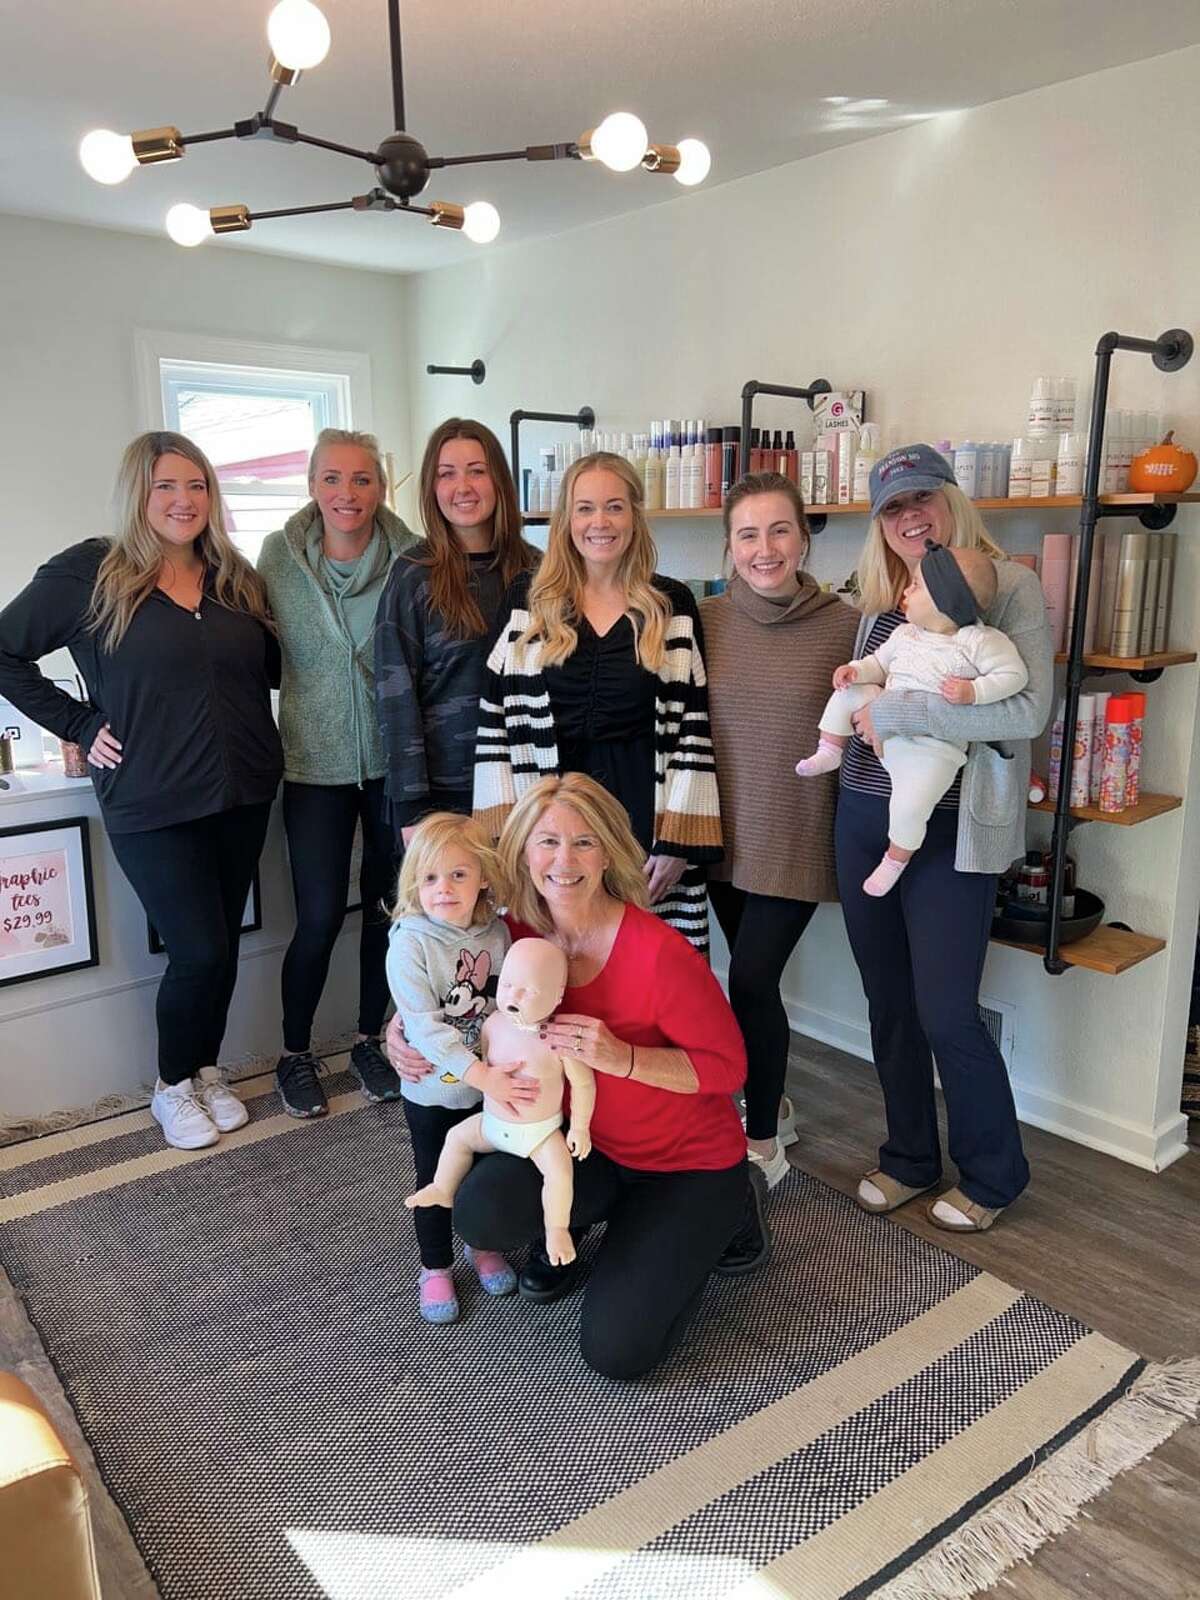 Susie Sweetman, front right, of Alton, known for her personal training, during her newly established CPR classes with the group Brush Hair and Make up, who she taught CPR, including that for infants and toddlers. Sweetman has started teaching CPR, which is good to know for all ages, all people, because it could save a life. 